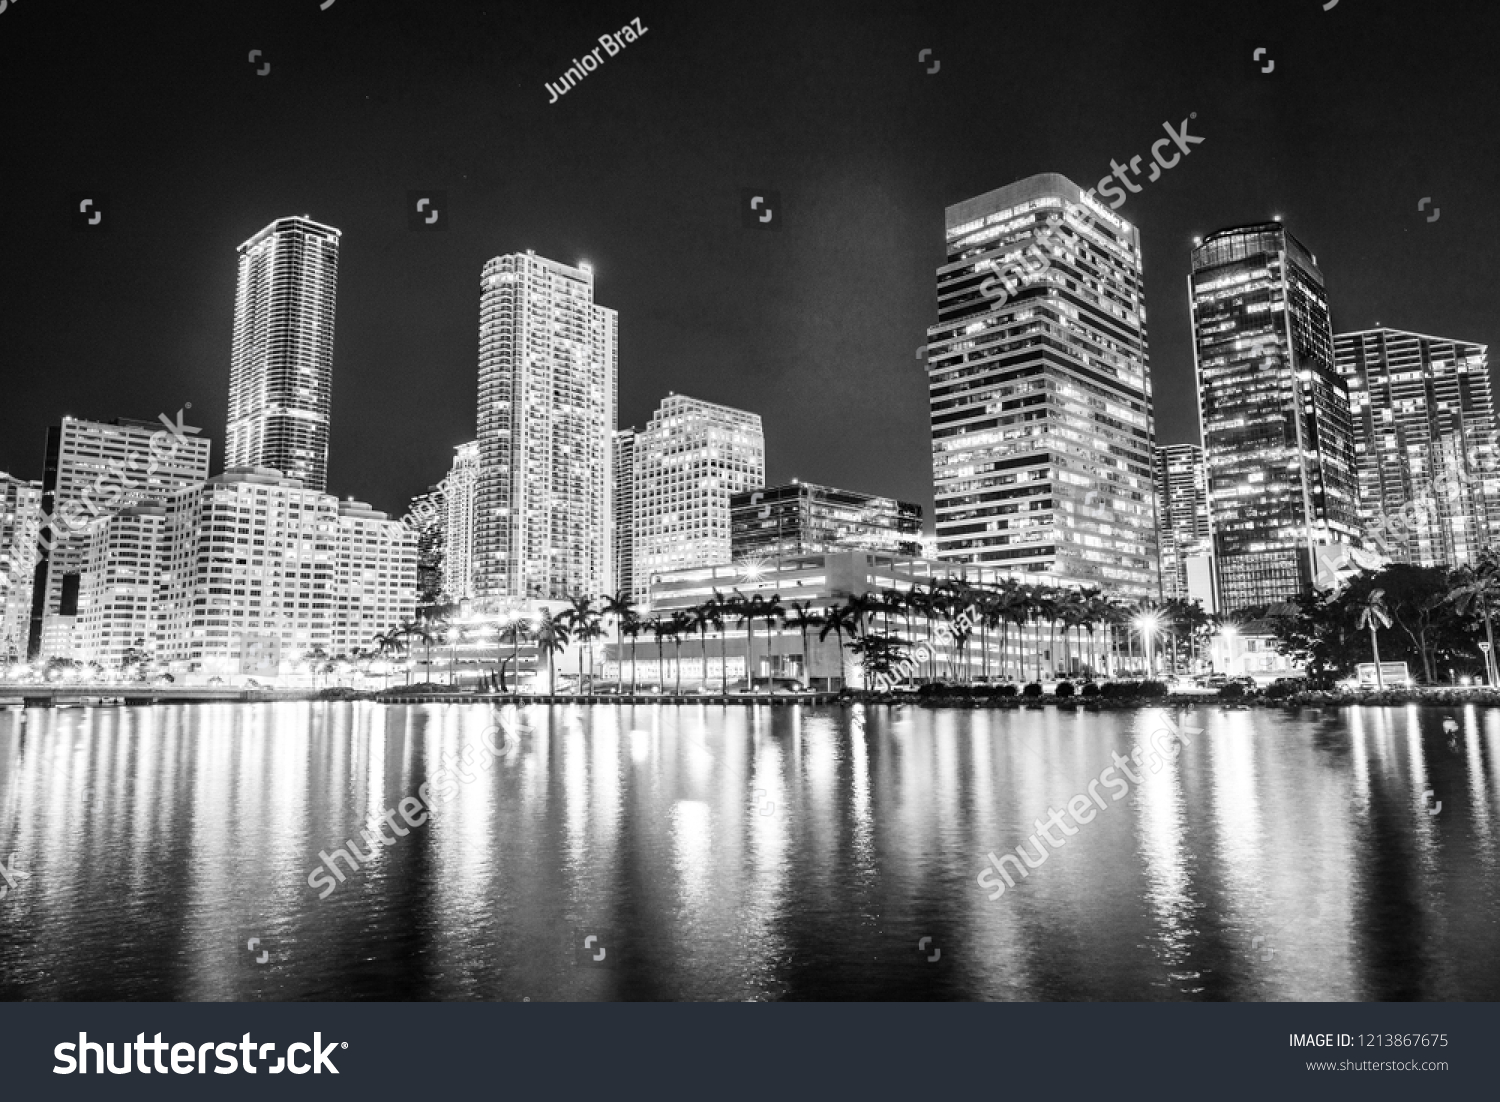 Miami downtown skyline architecture in black and white reflections #1213867675